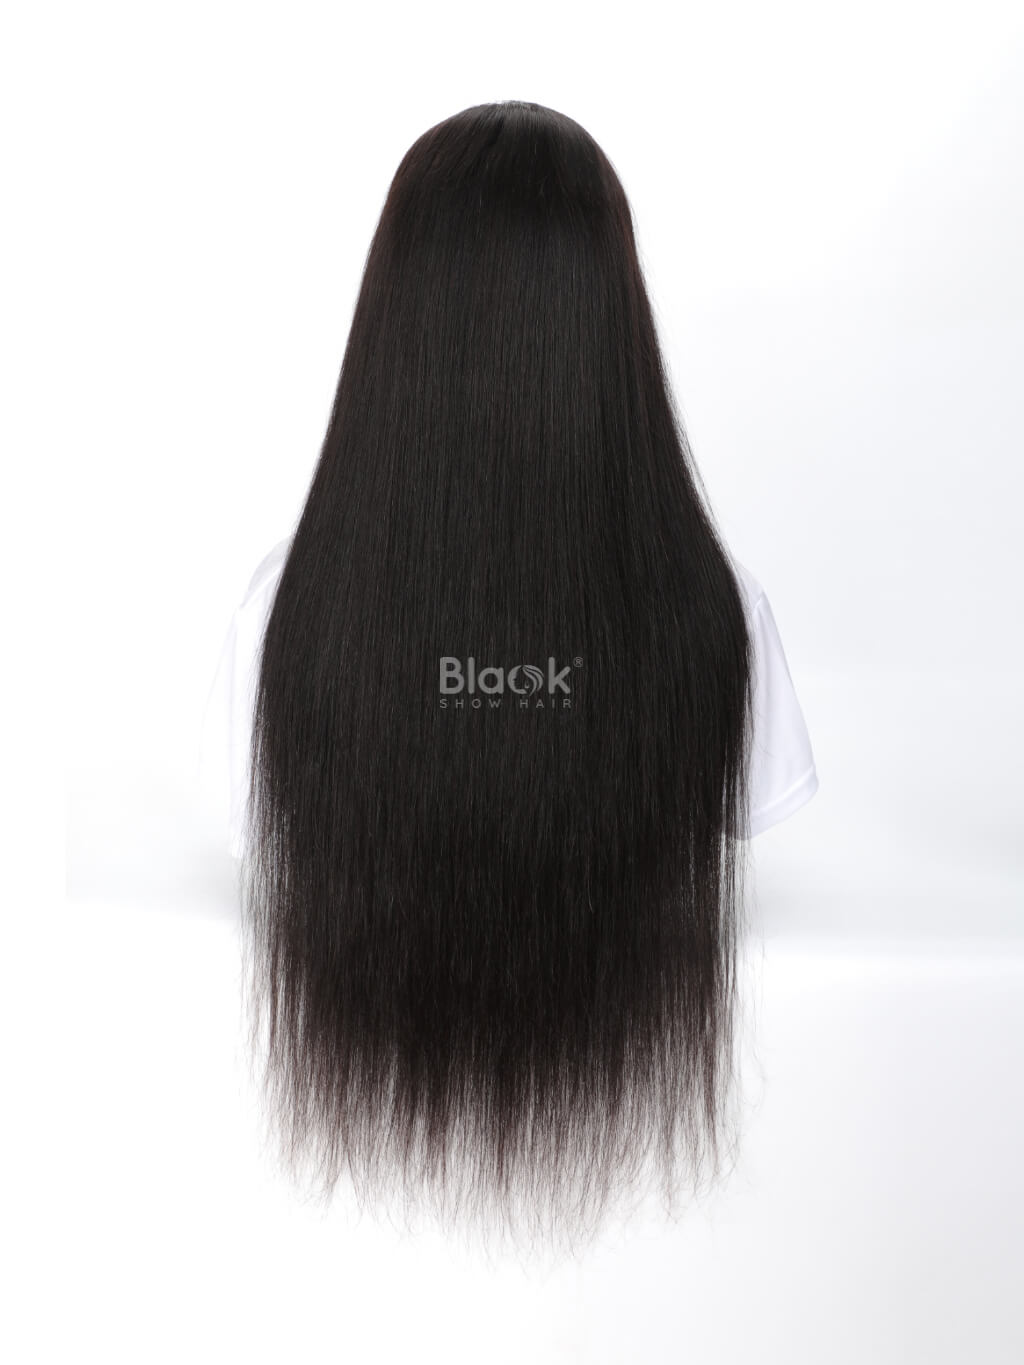 transparent lace 4x4 closure wig straight hair